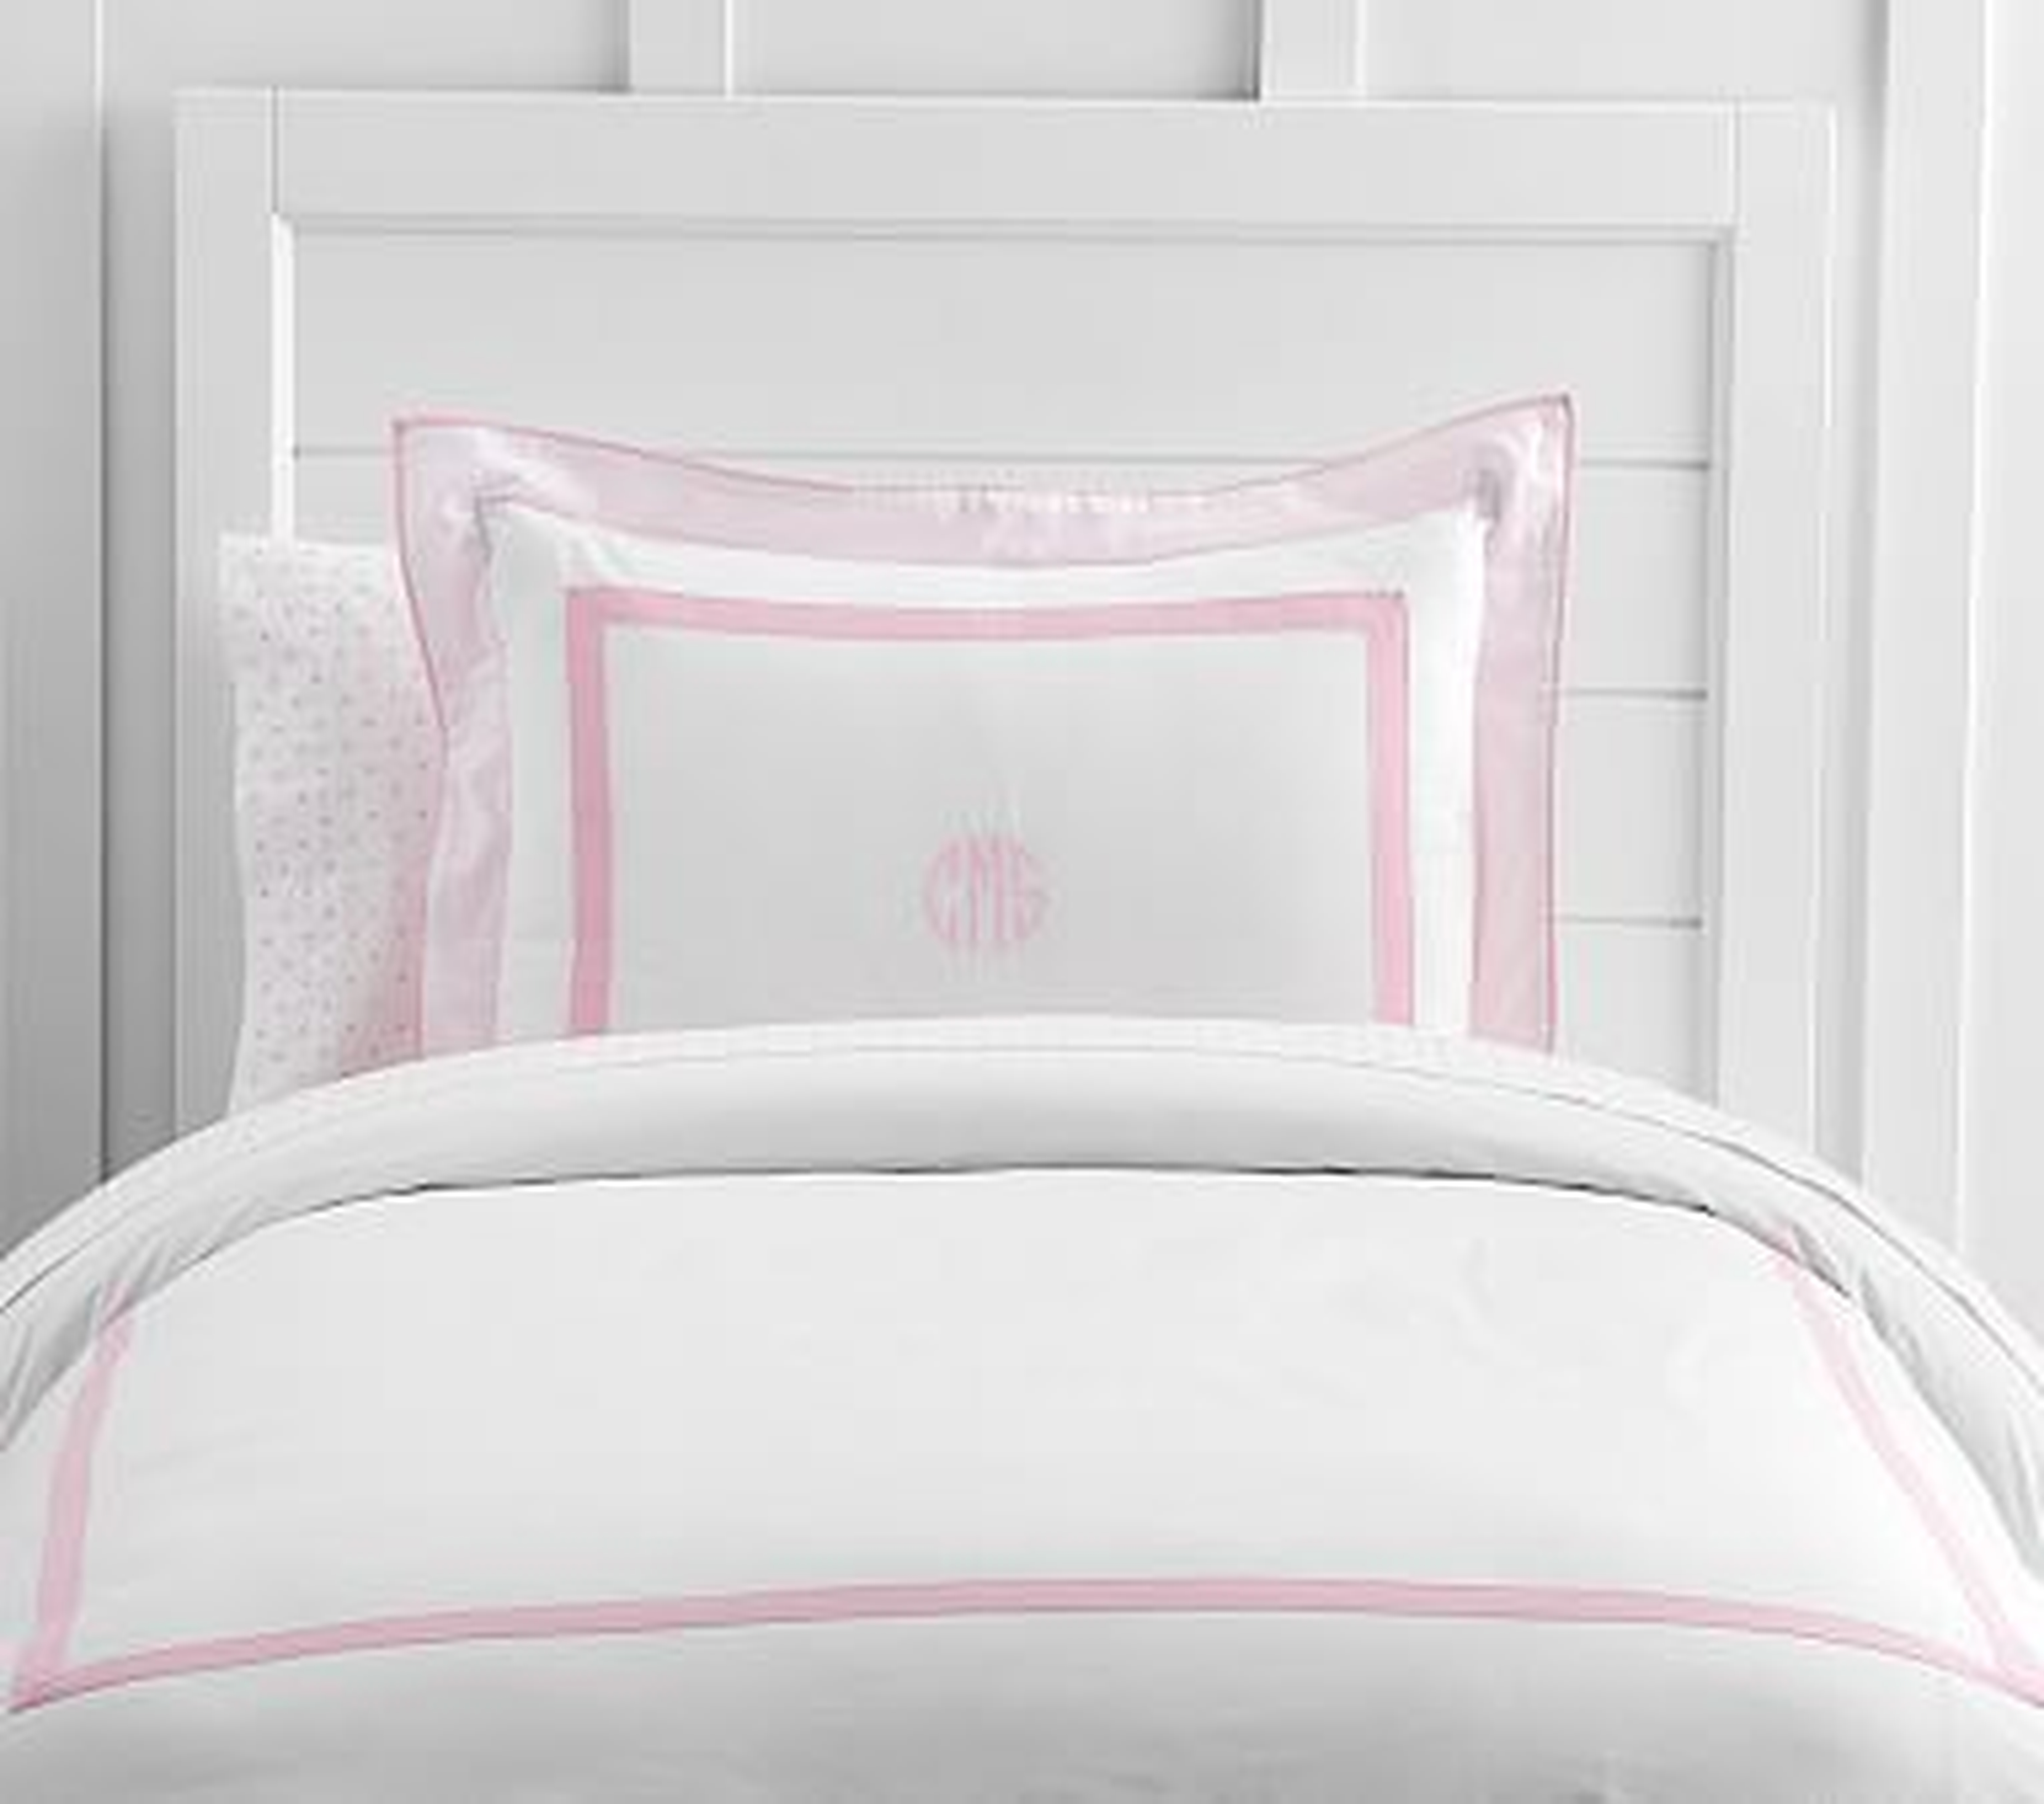 Decorator Solid Border Duvet Cover, Full-Queen, Pale Pink - Pottery Barn Kids